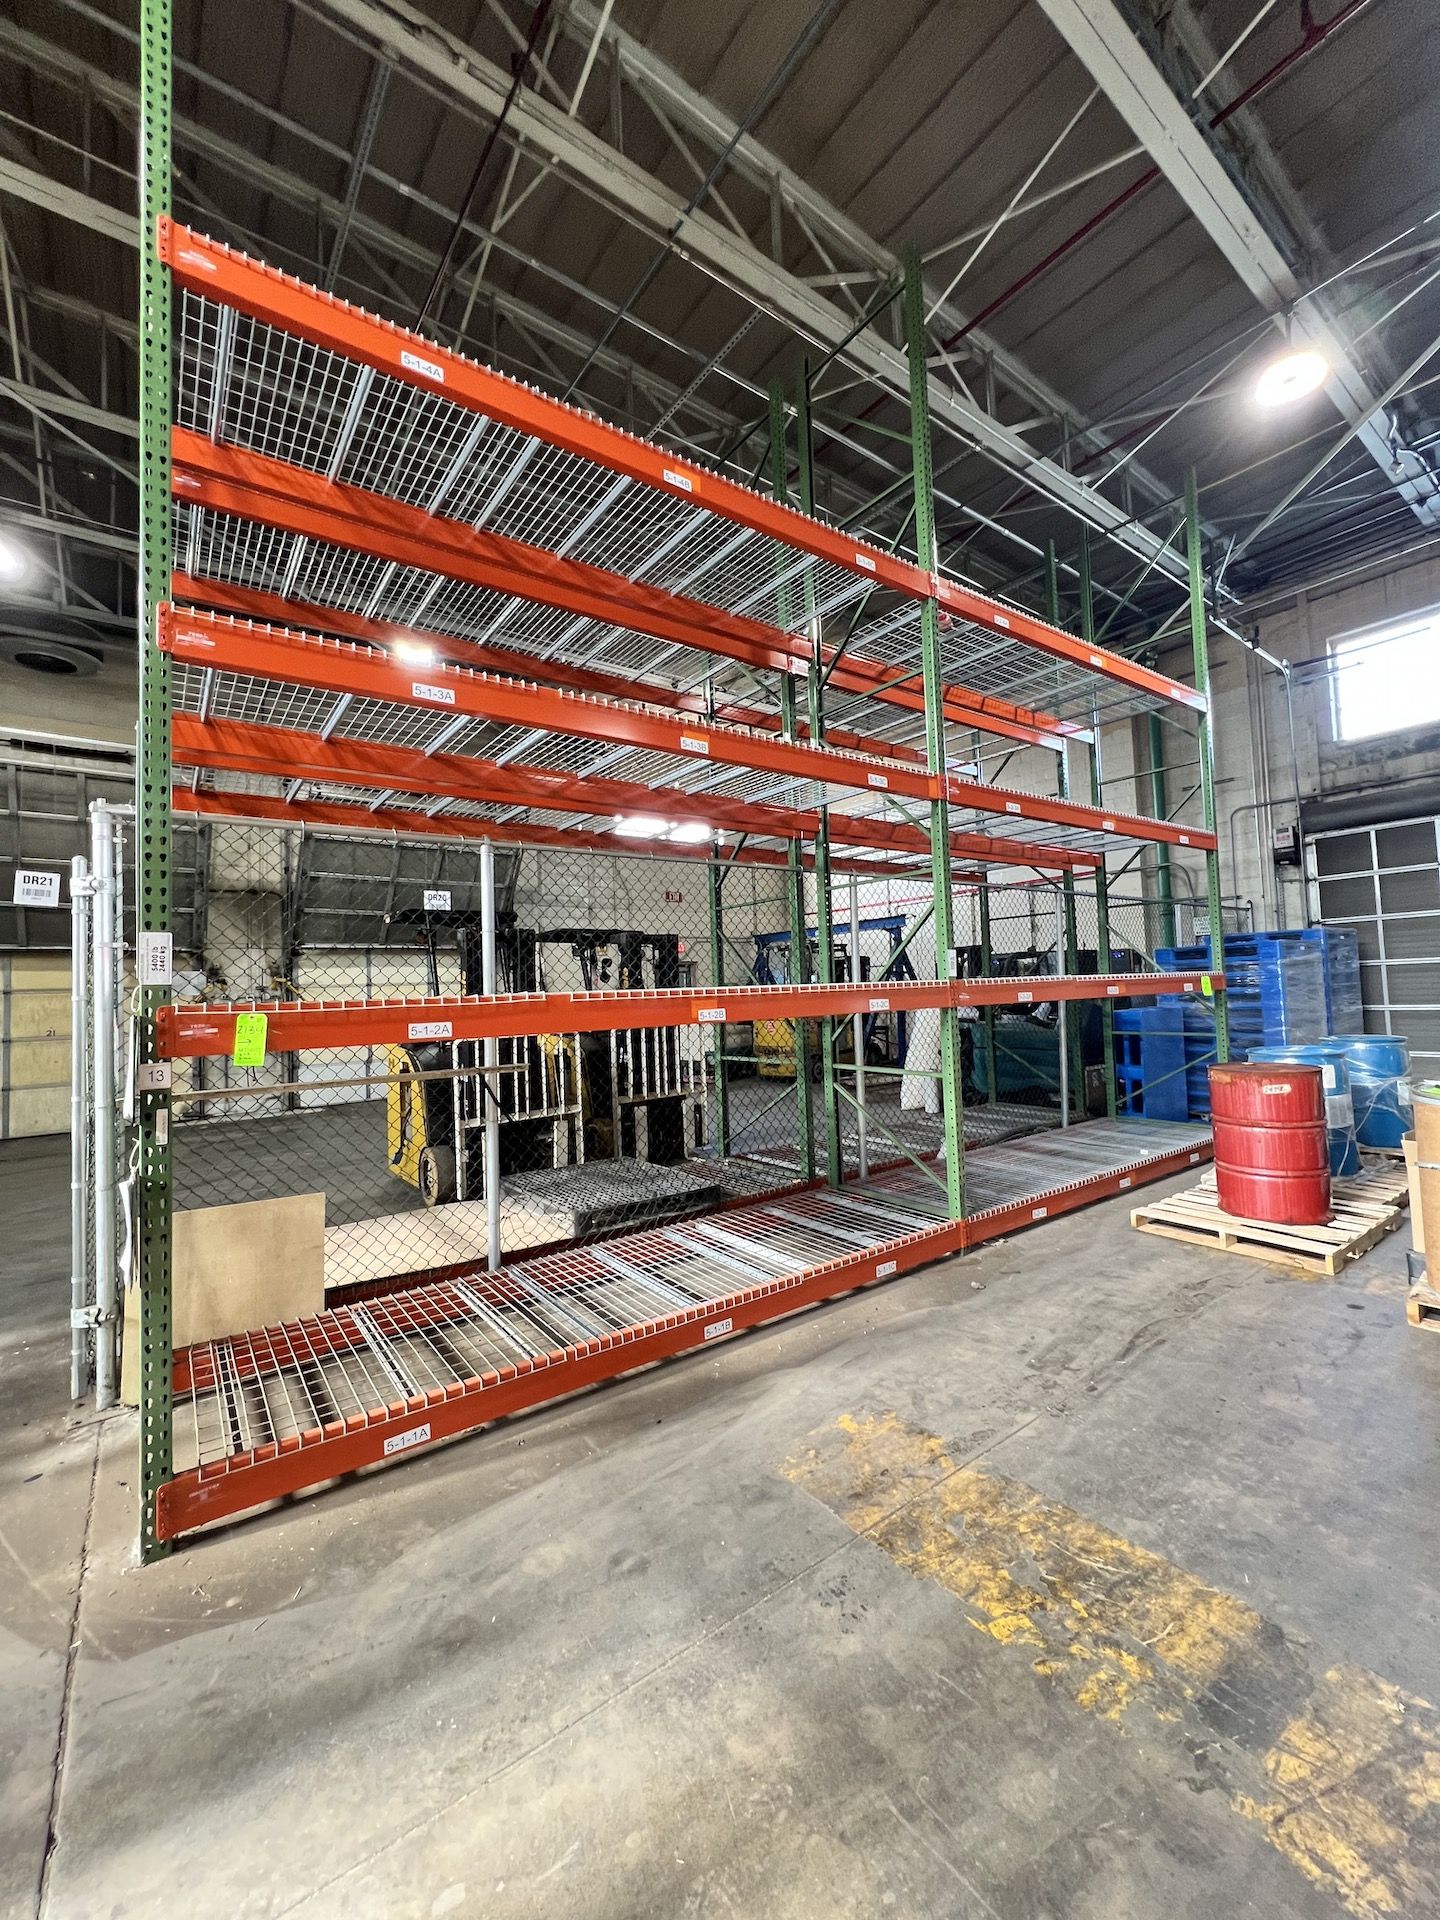 PALLET RACKING, 3 UP-RIGHTS AND 16 CROSS BEAMS